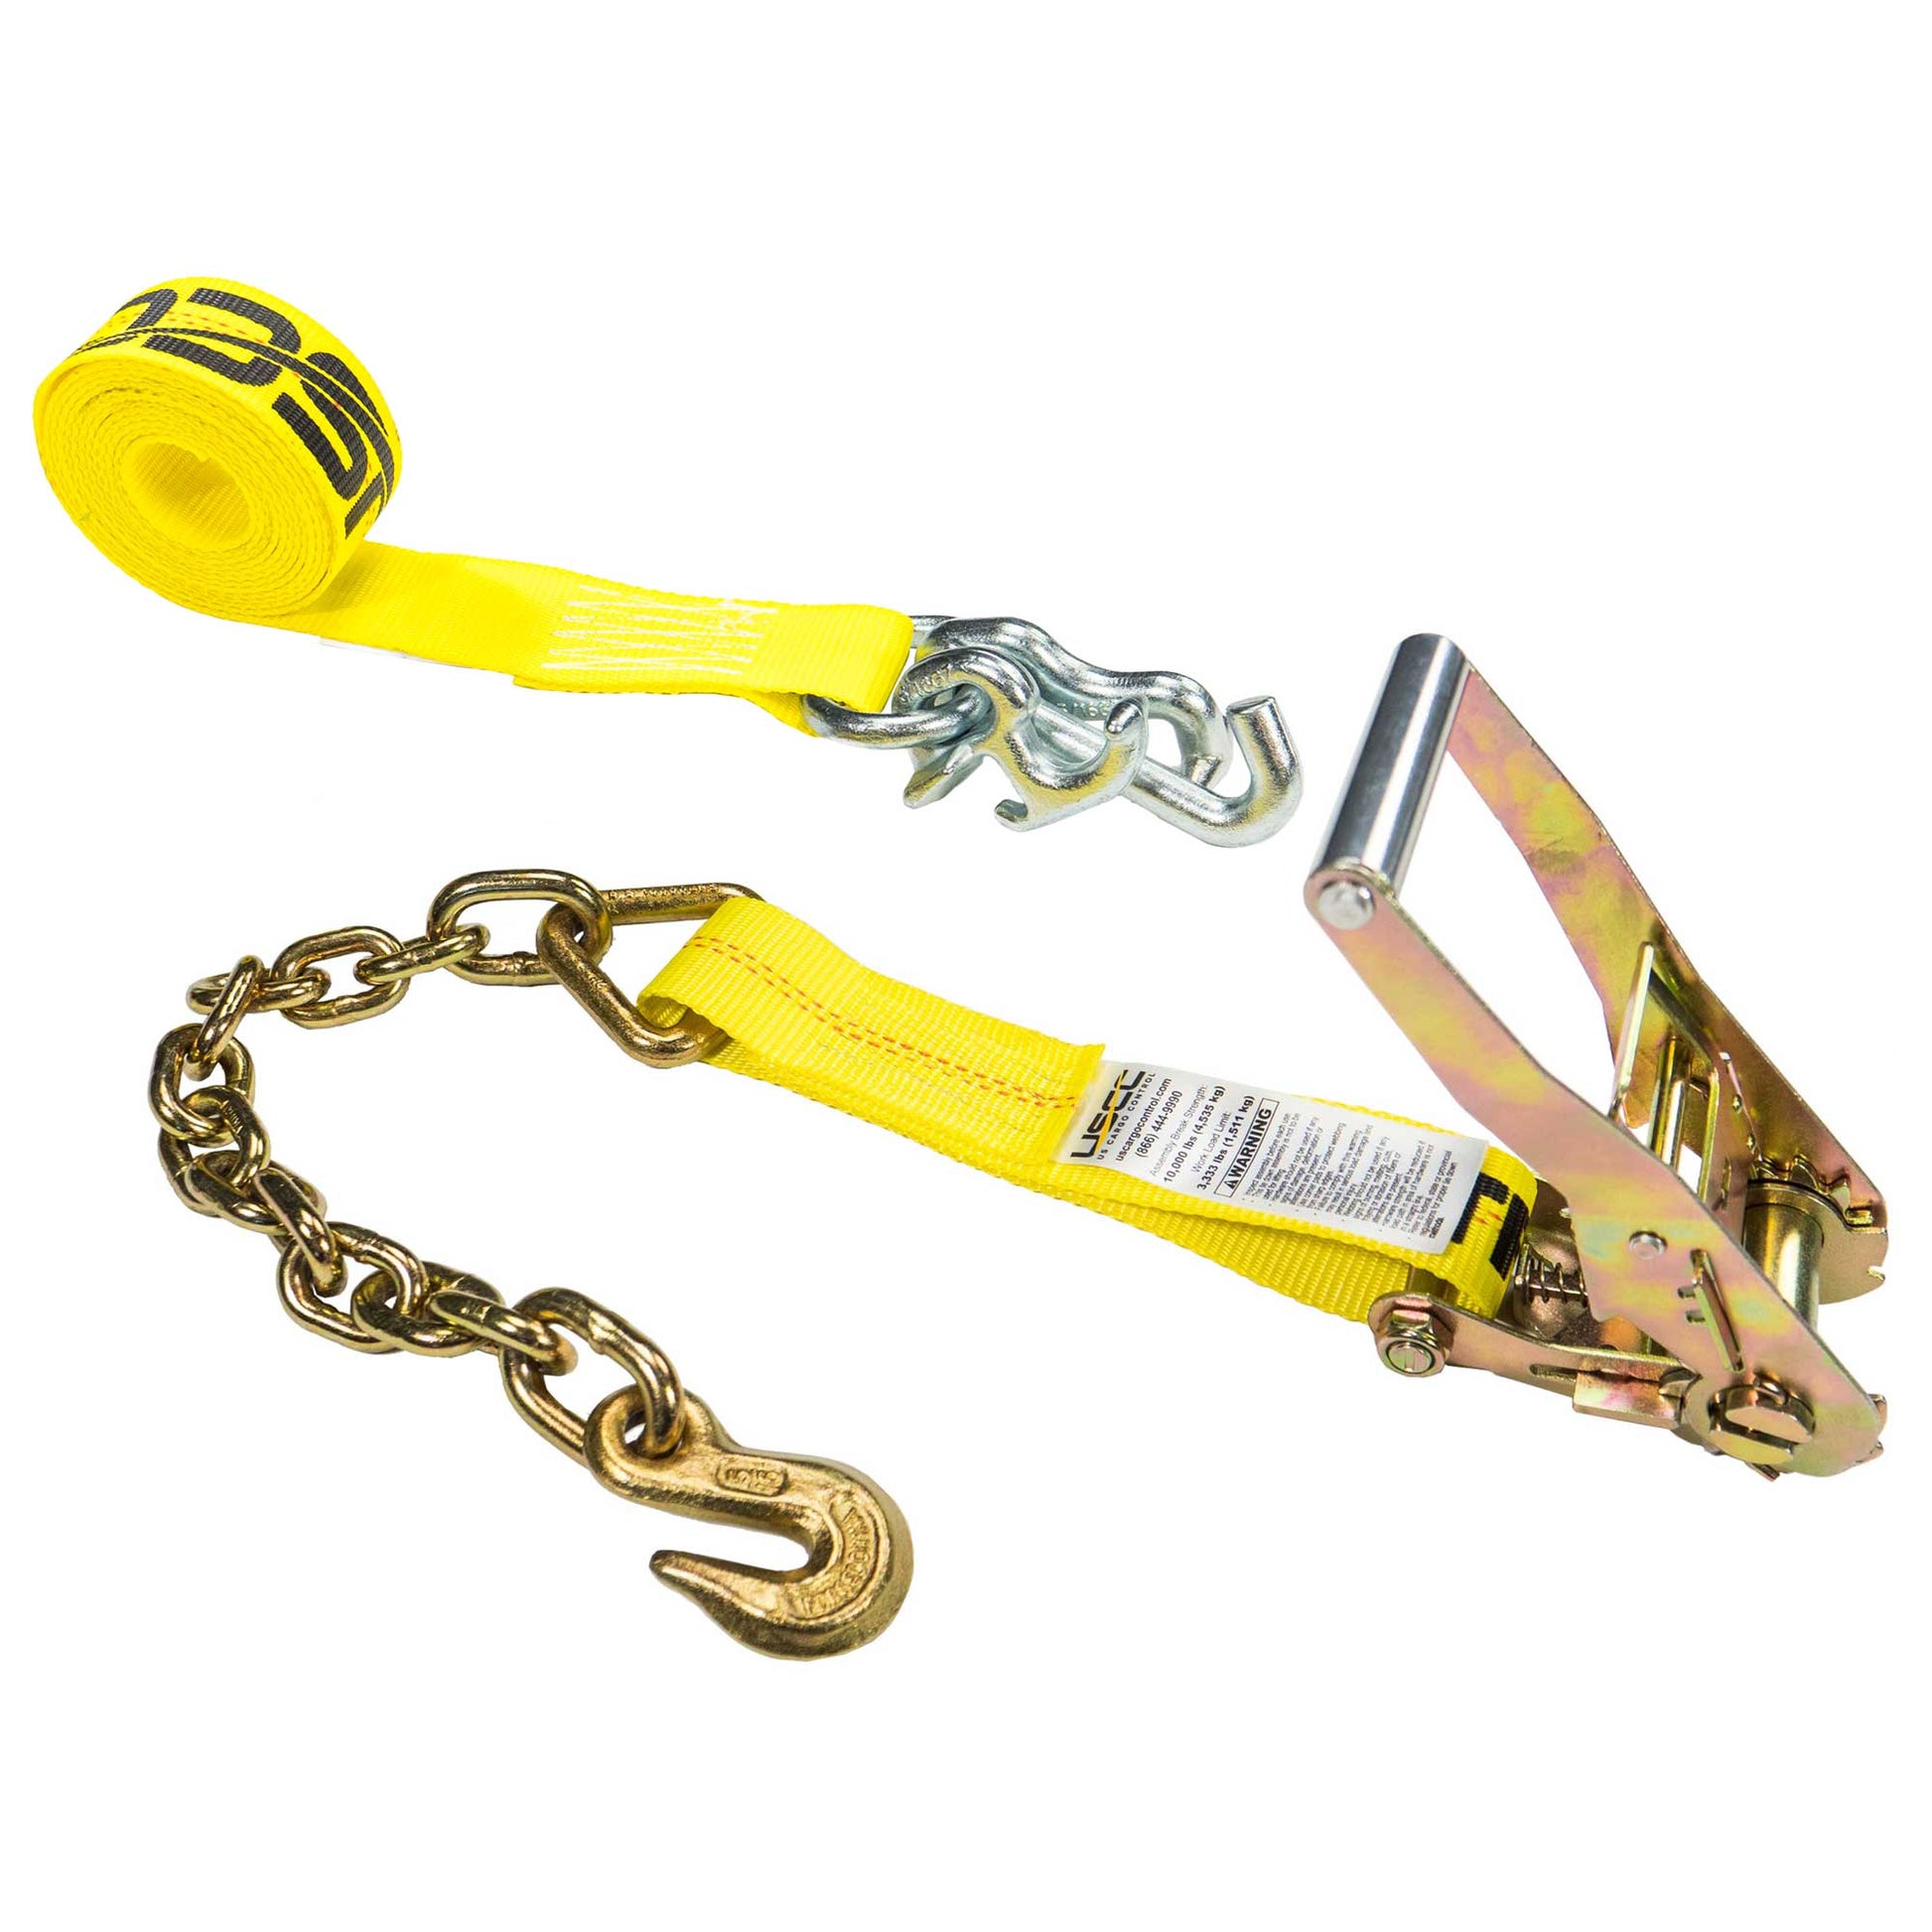 15' tow truck strap -  tow strap with RTJ cluster hook and chain end